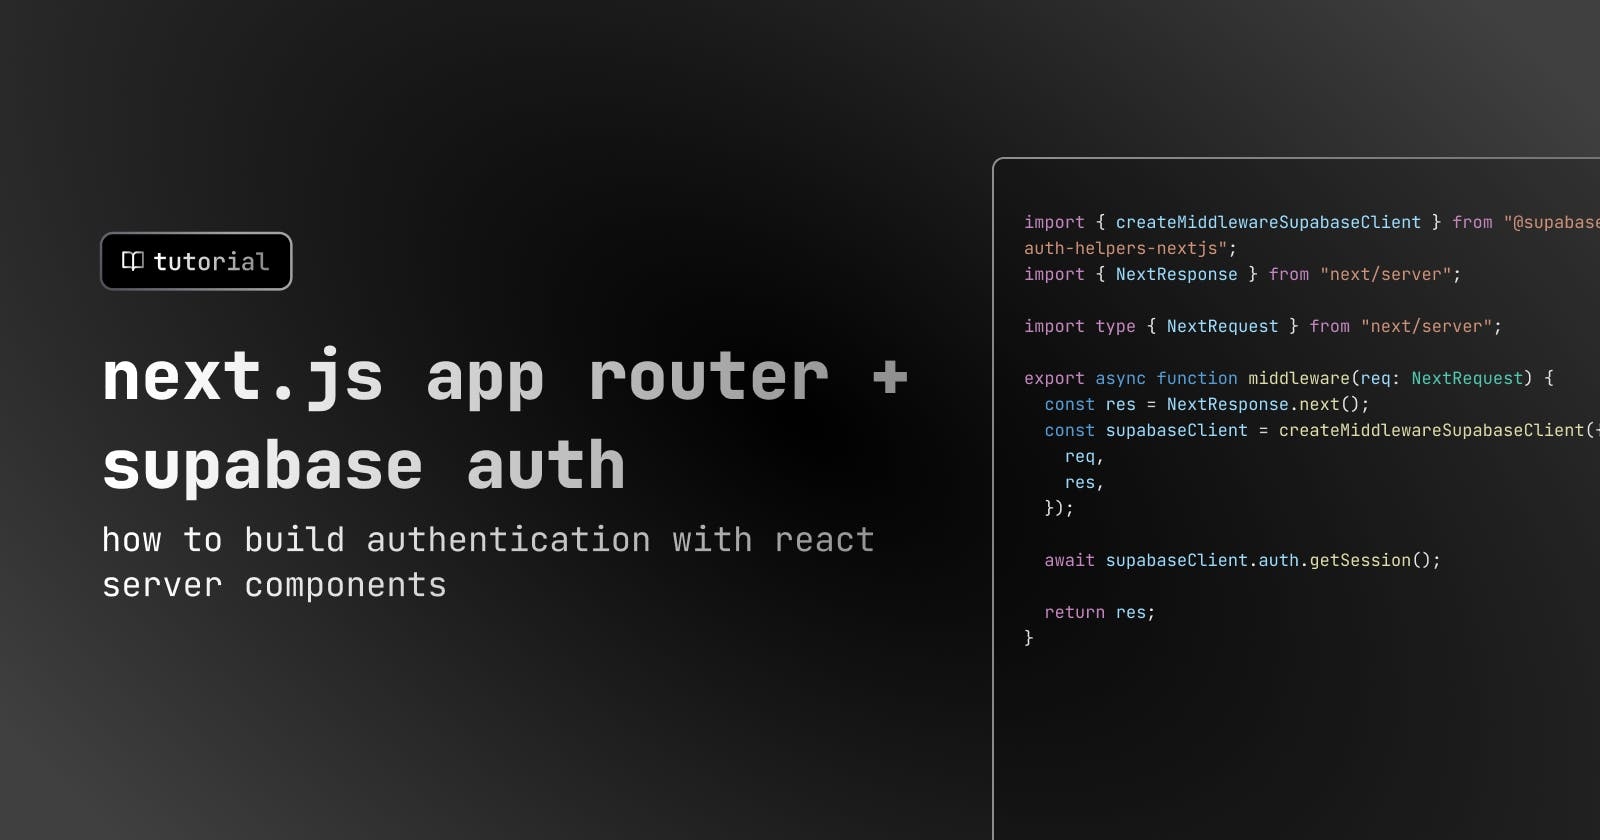 How to build auth with Next.js App Router and Supabase Auth